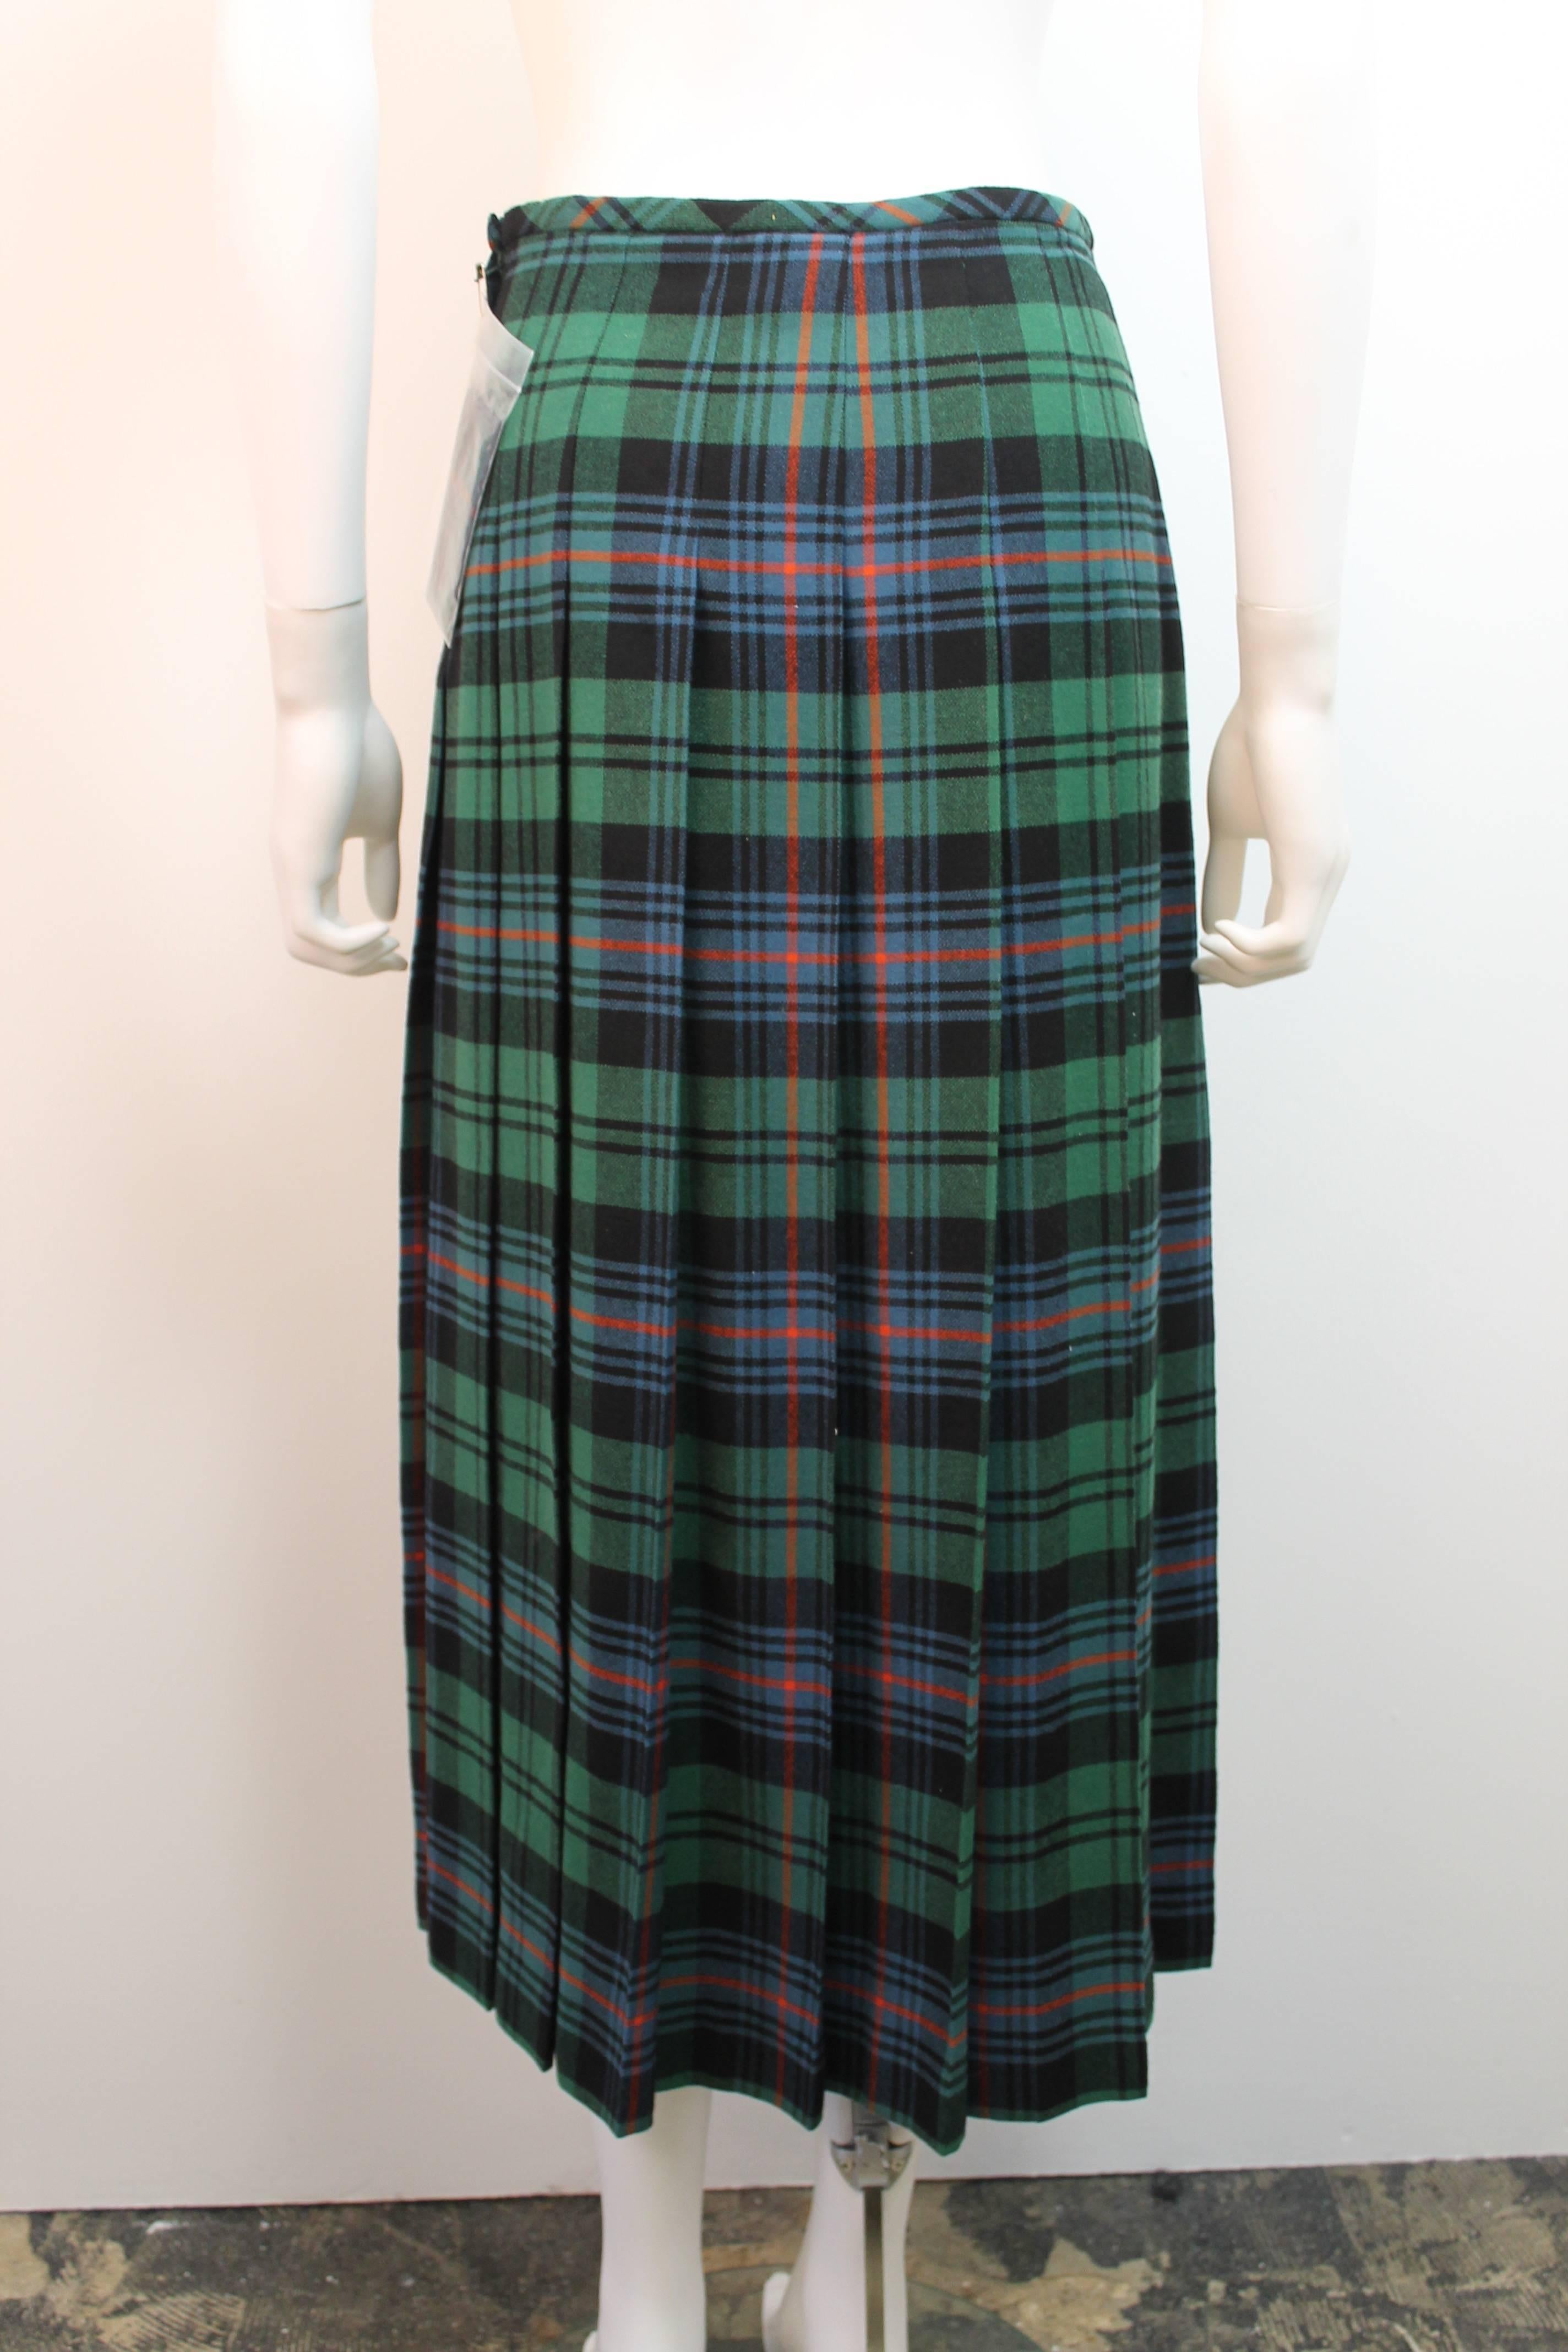 Classic green plaid skirt by Comme des Garcons Robe de Chambre. Features a thin waistband and pleating all the way around. Closes with a side zipper.